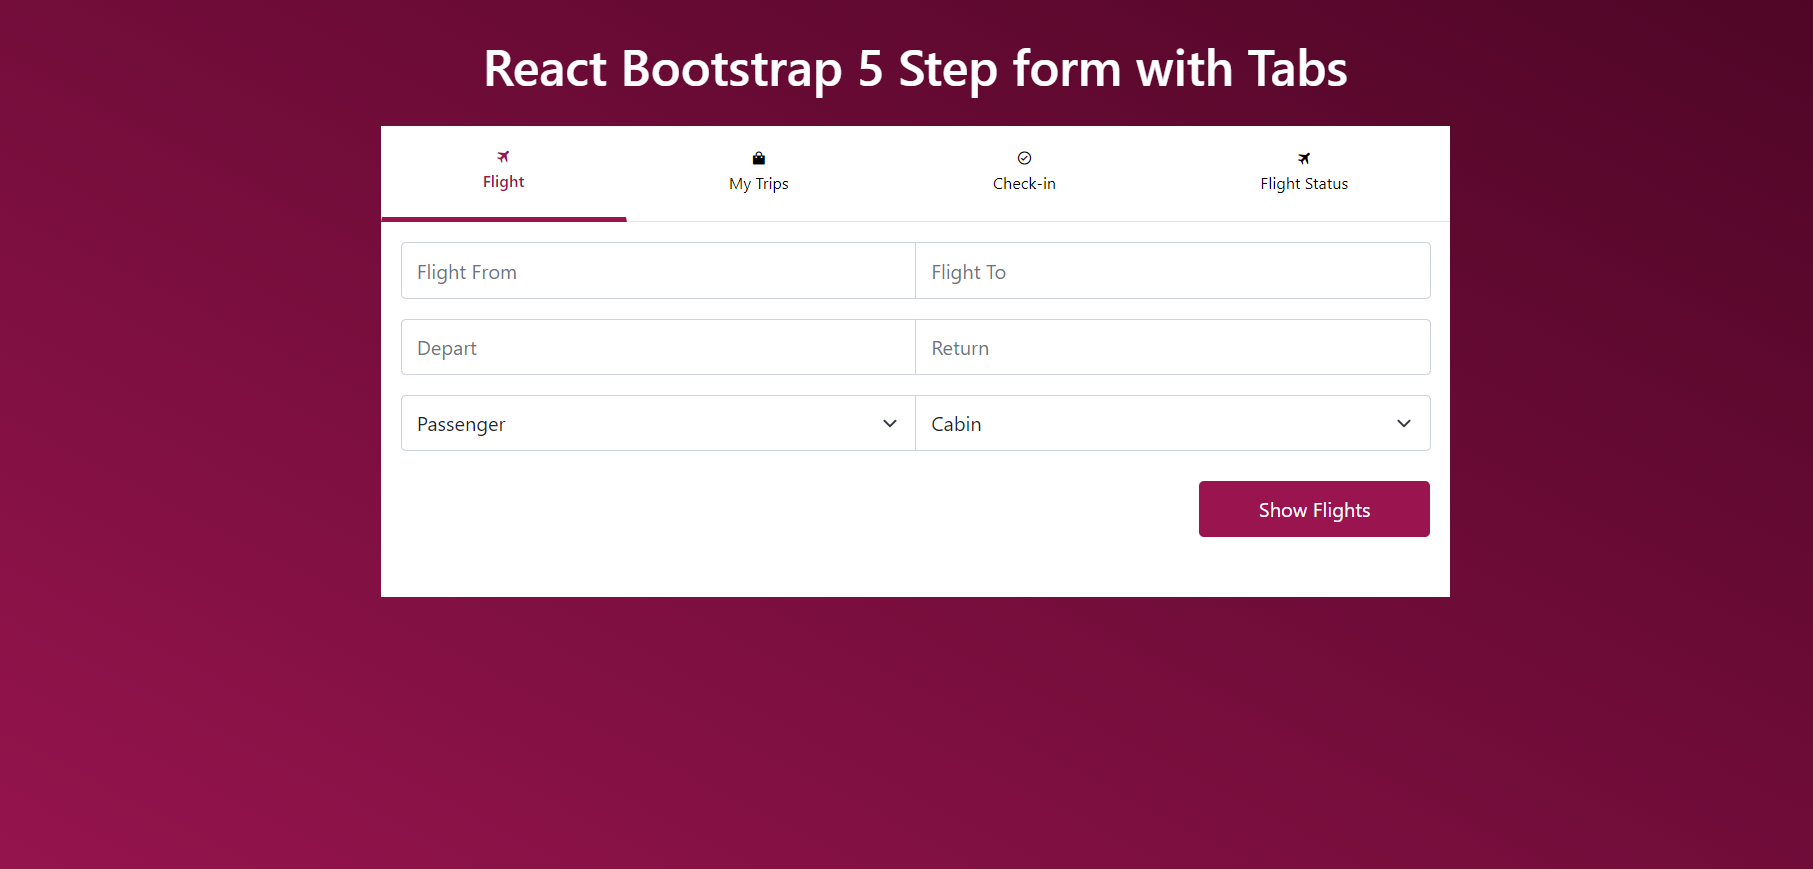 Reactjs Bootstrap 5 Step Form with Tabs